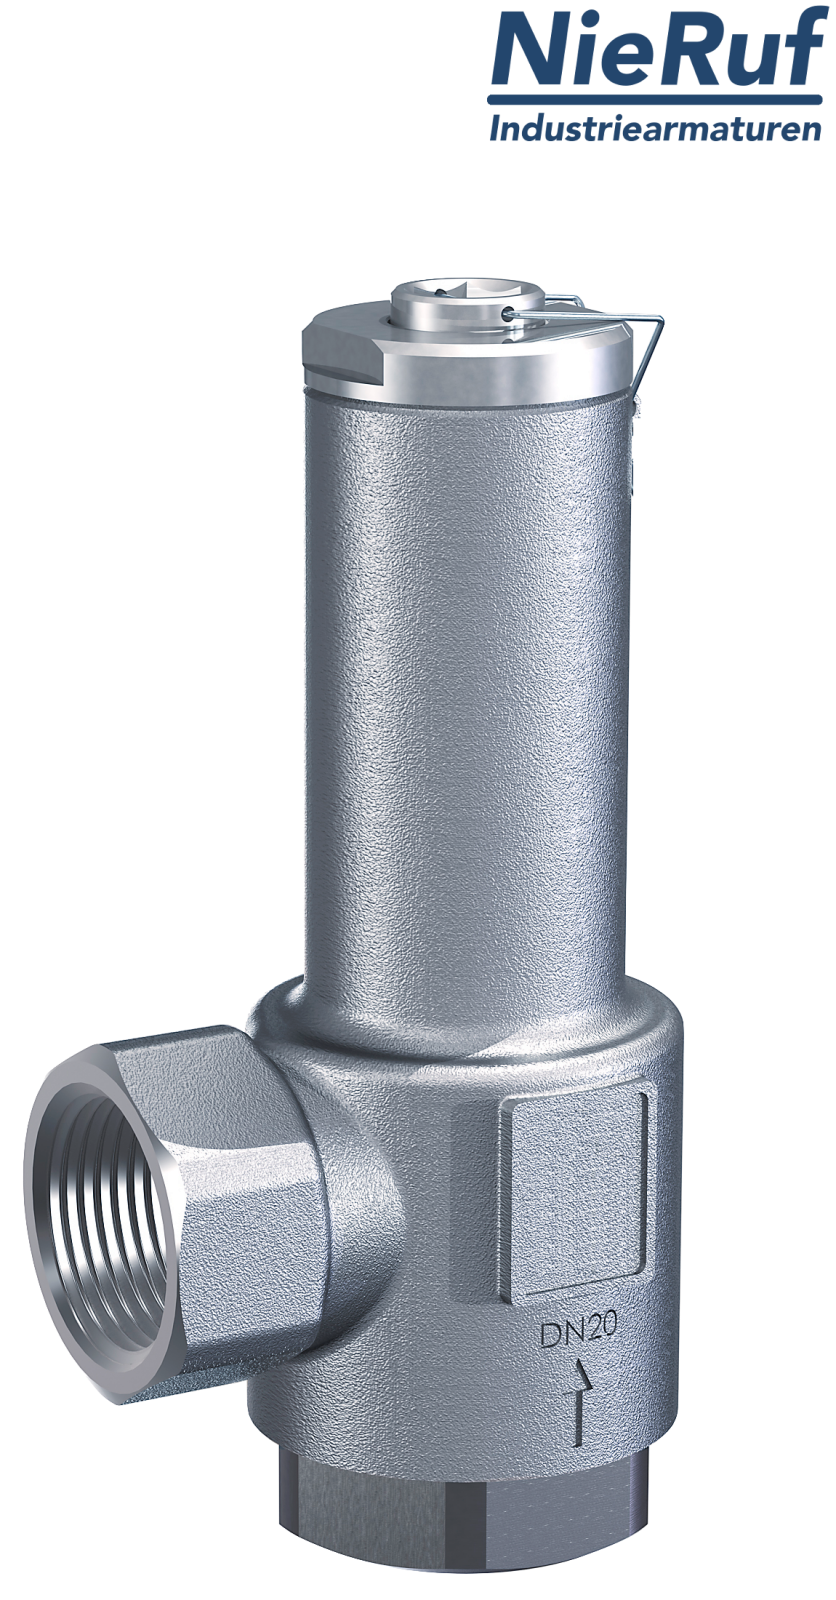 angle-type overflow valve 1 1/2" inch fm UV03 stainless steel AISI 316L 0,5 - 2,5 bar